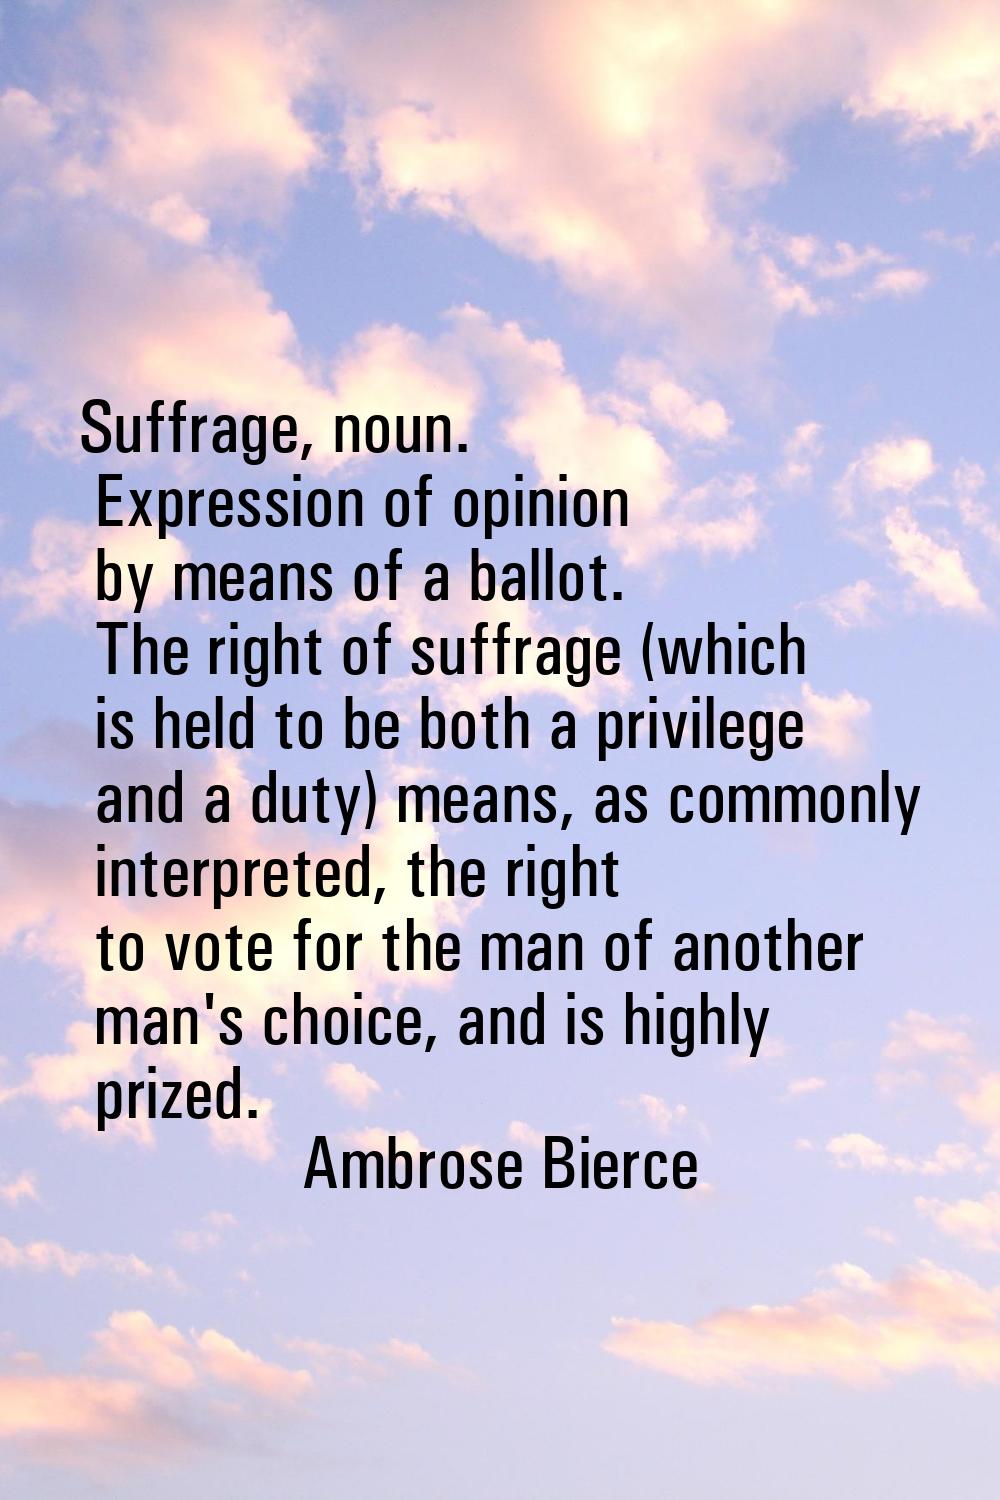 Suffrage, noun. Expression of opinion by means of a ballot. The right of suffrage (which is held to